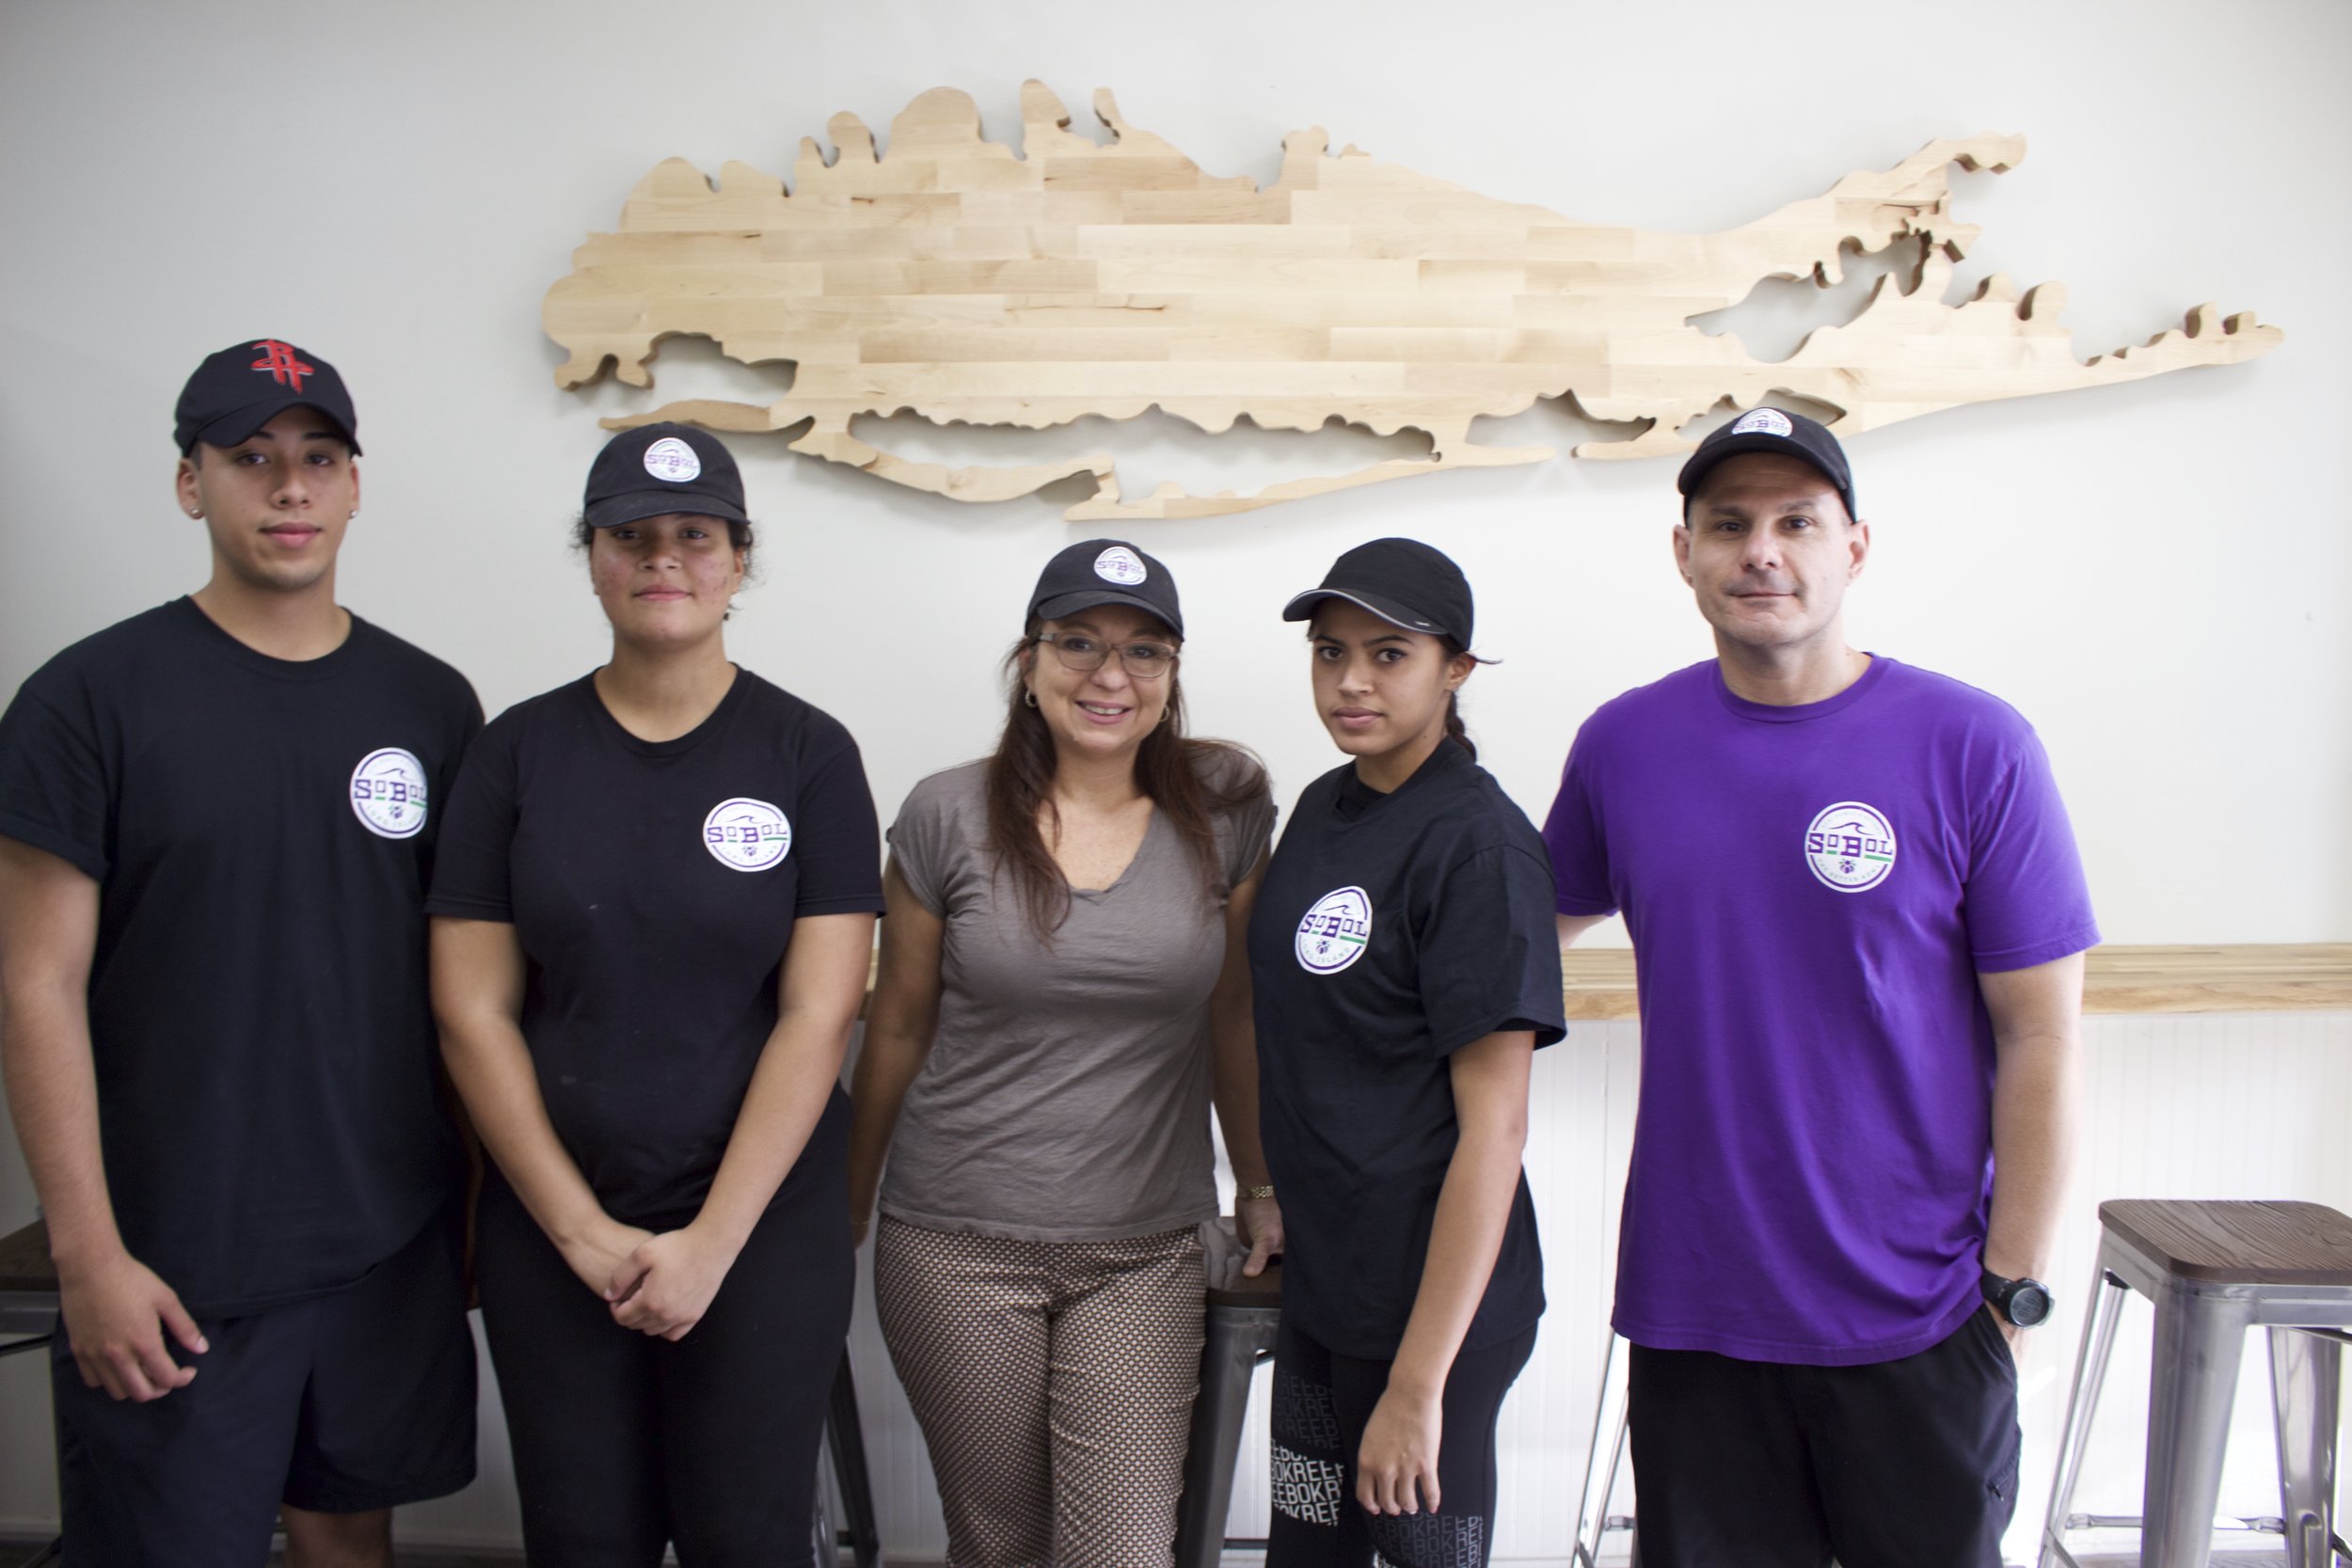   Sandra Recchione, owner of SoBol in Huntington, said the franchise is like a big family. Pictured, from left, are: Marvin Hidalgo, team member; Tessa Duff, aspiring assistant manager; Recchione; Andrea Ortiz, food prep worker; and Pat Herrera, area